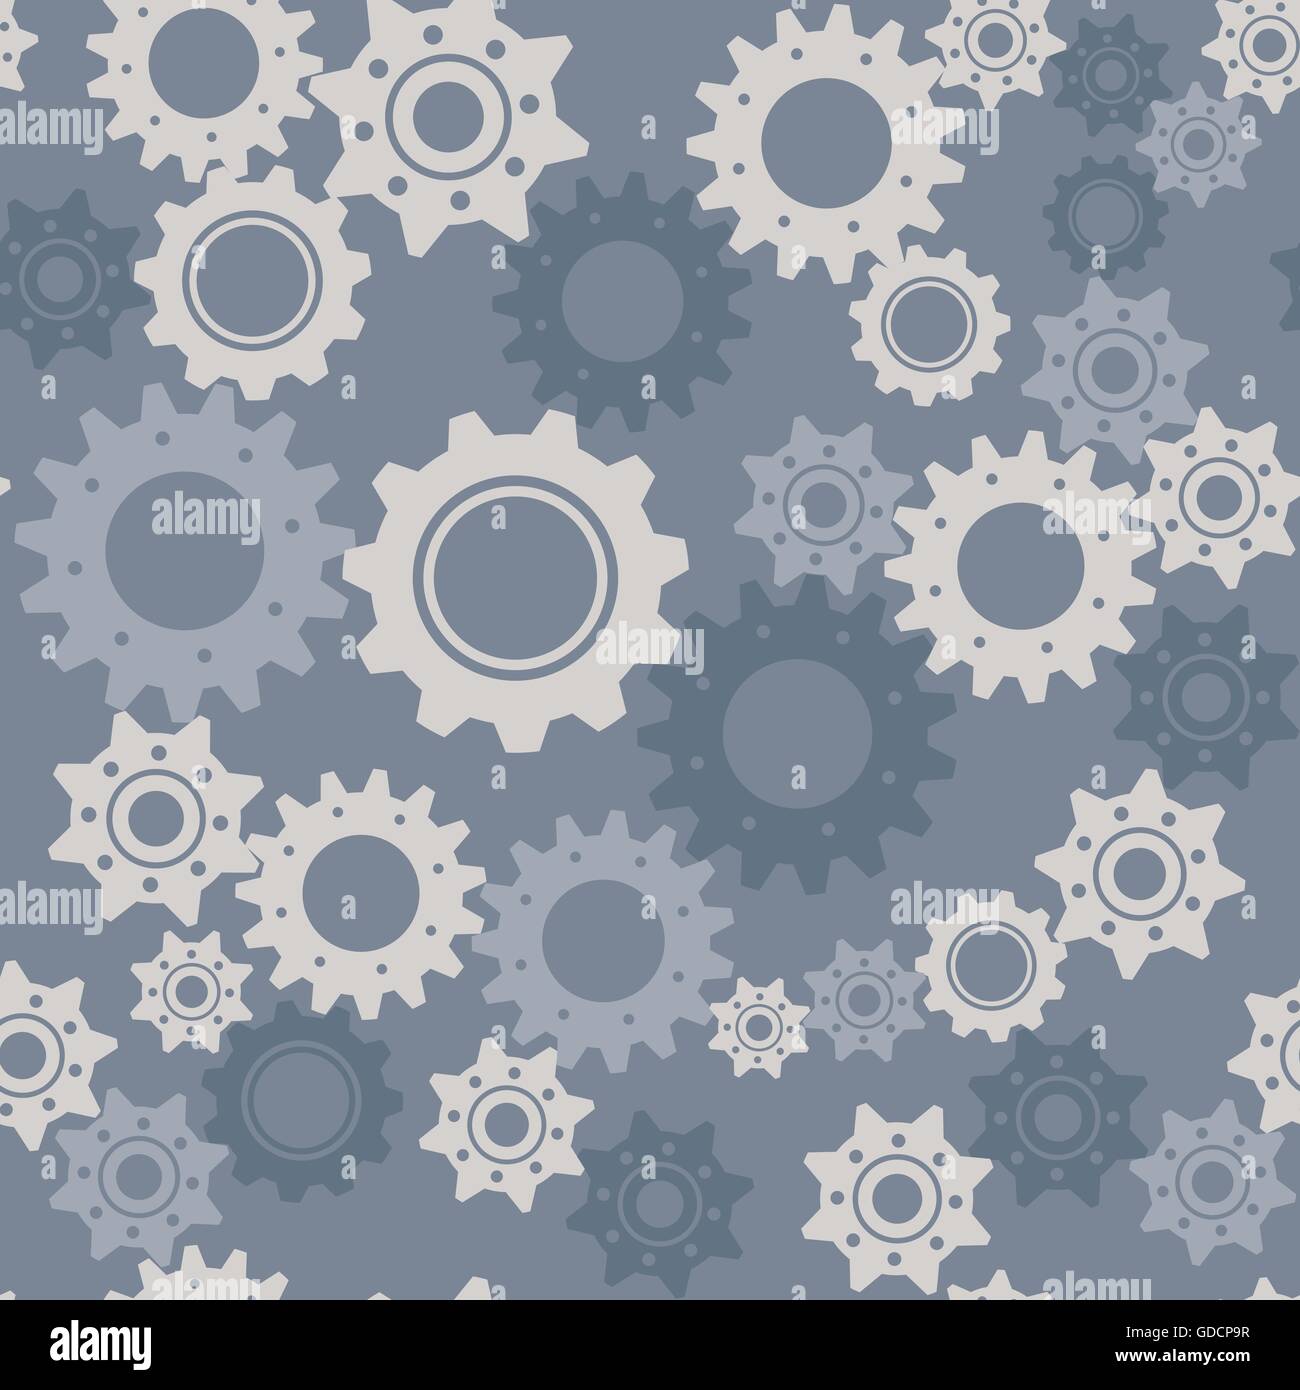 Gears seamless vector pattern, engineering and technology concept Stock Vector